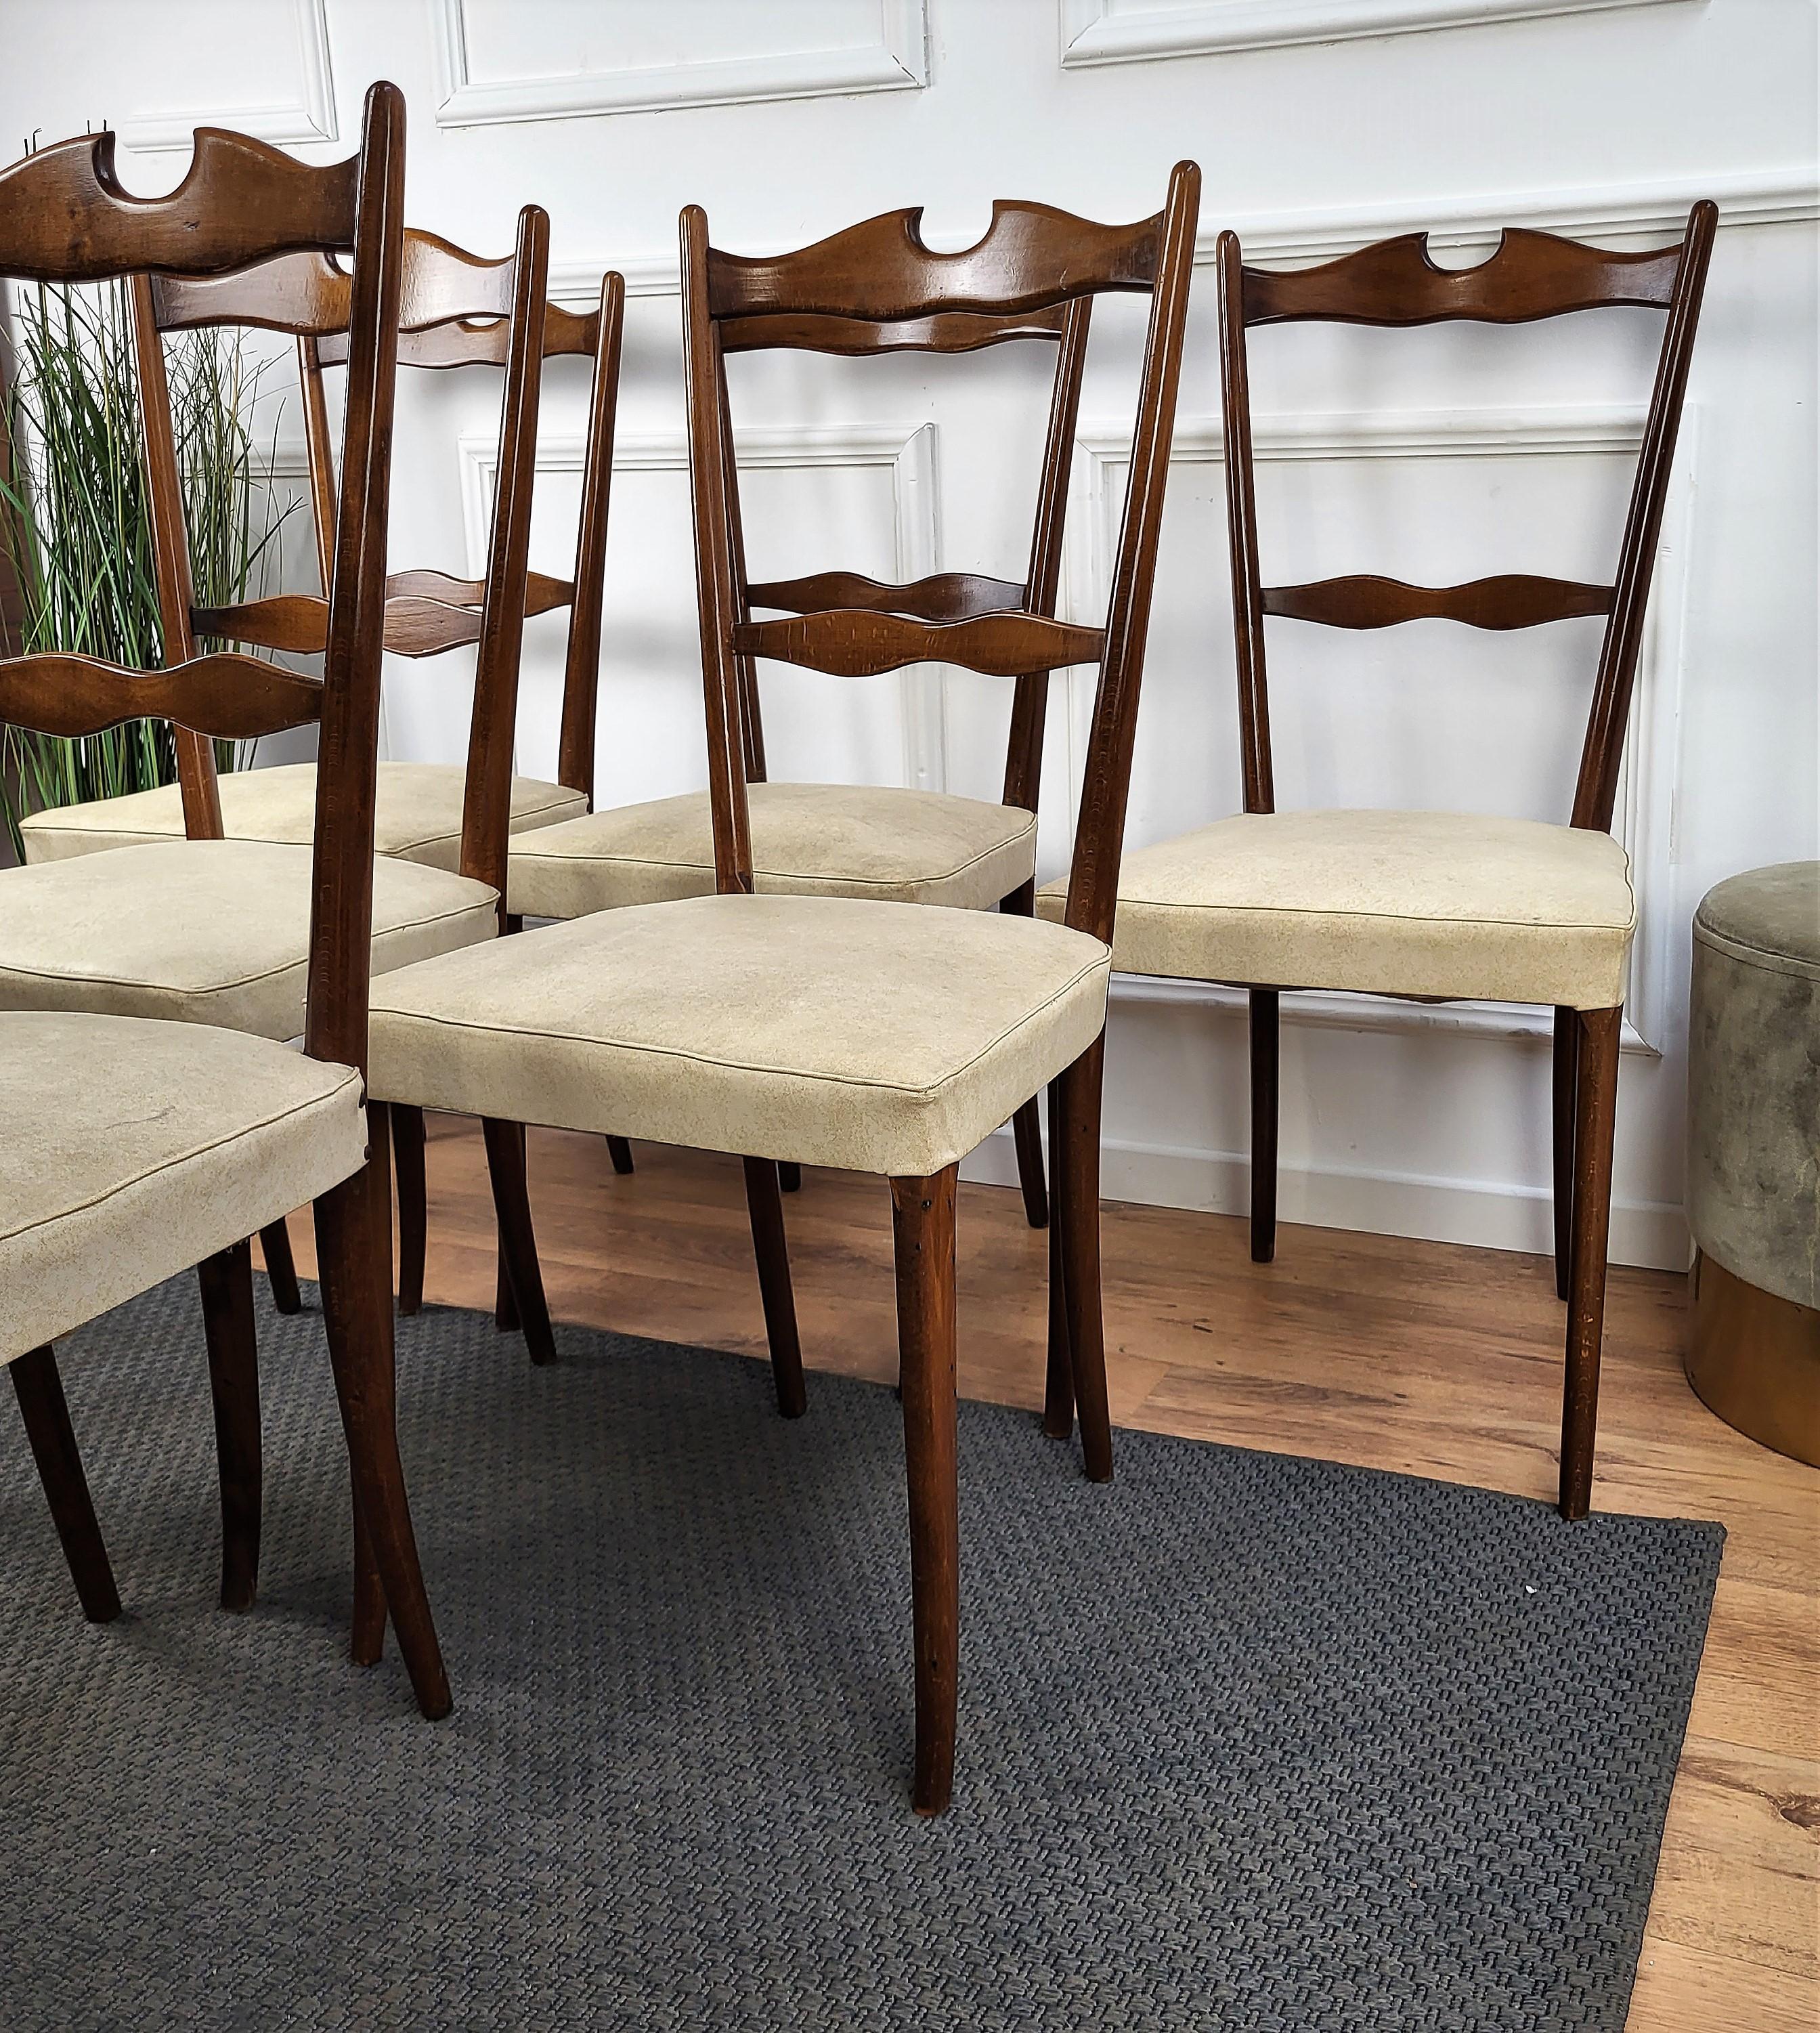 Set of 6 Mid-Century Modern Italian Walnut Wood Upholstered Dining Chairs For Sale 4